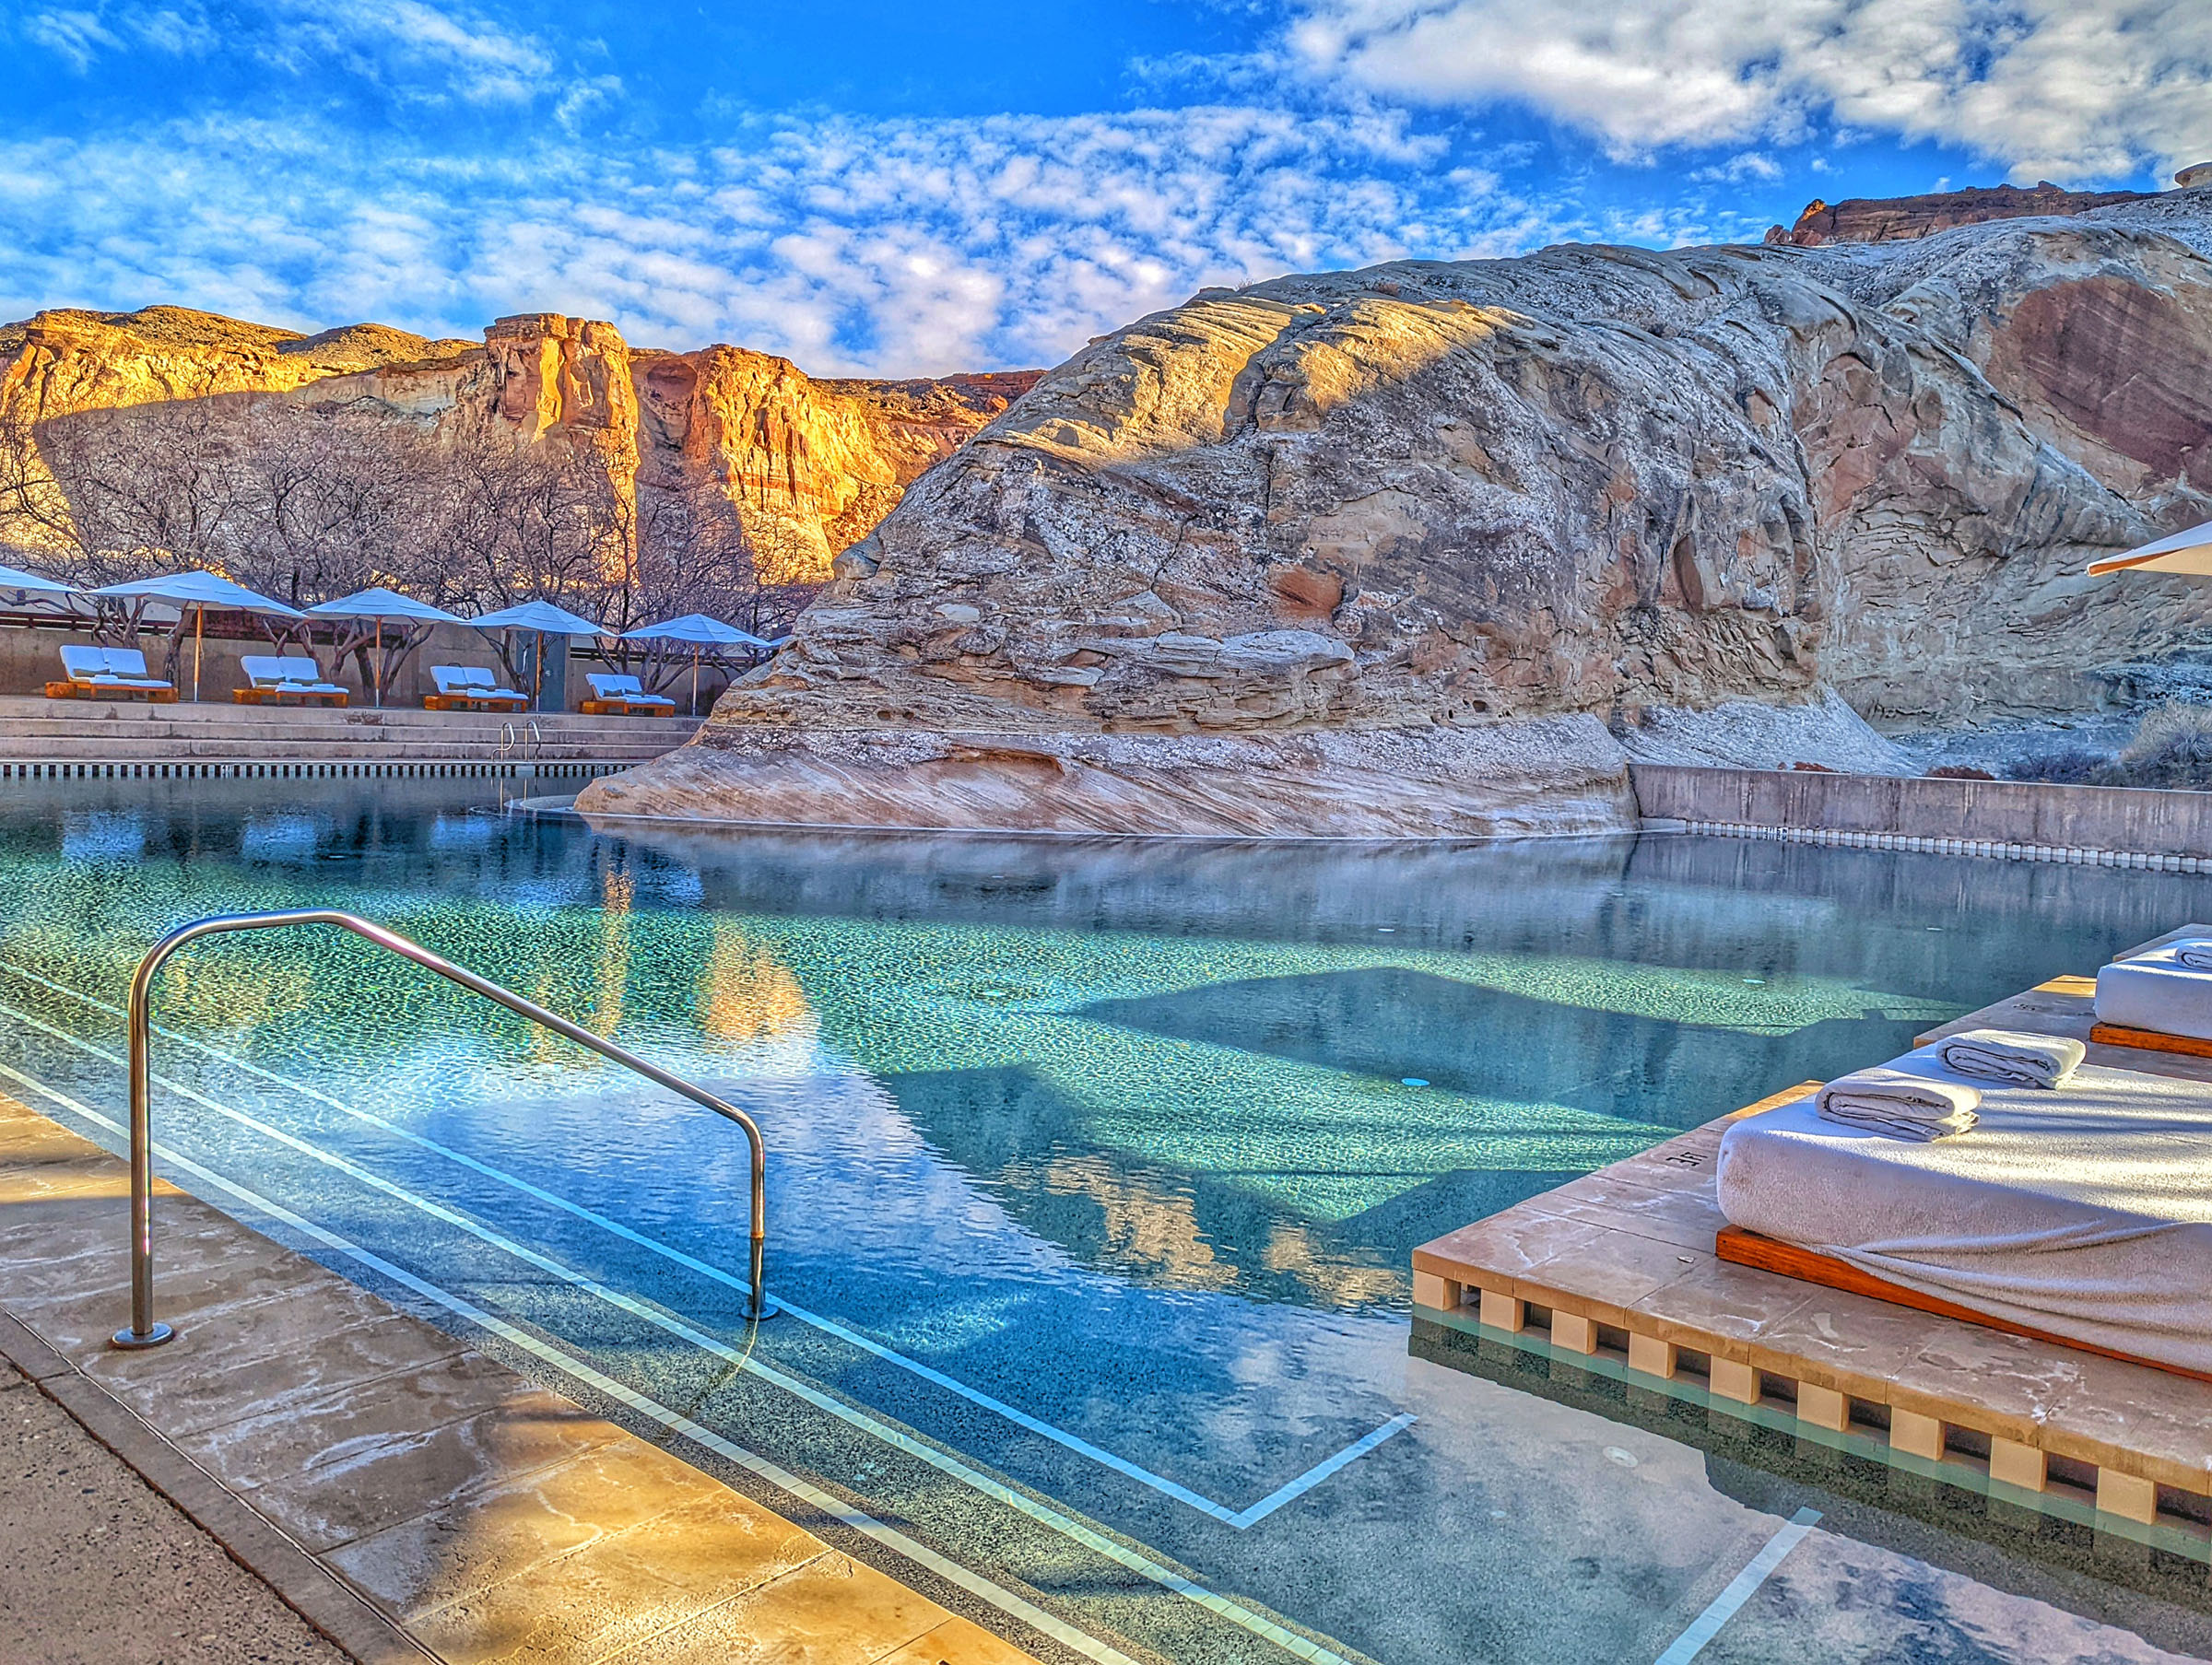 The dramatic swimming pool at Amangiri Resort is built directly into the surrounding sandstone